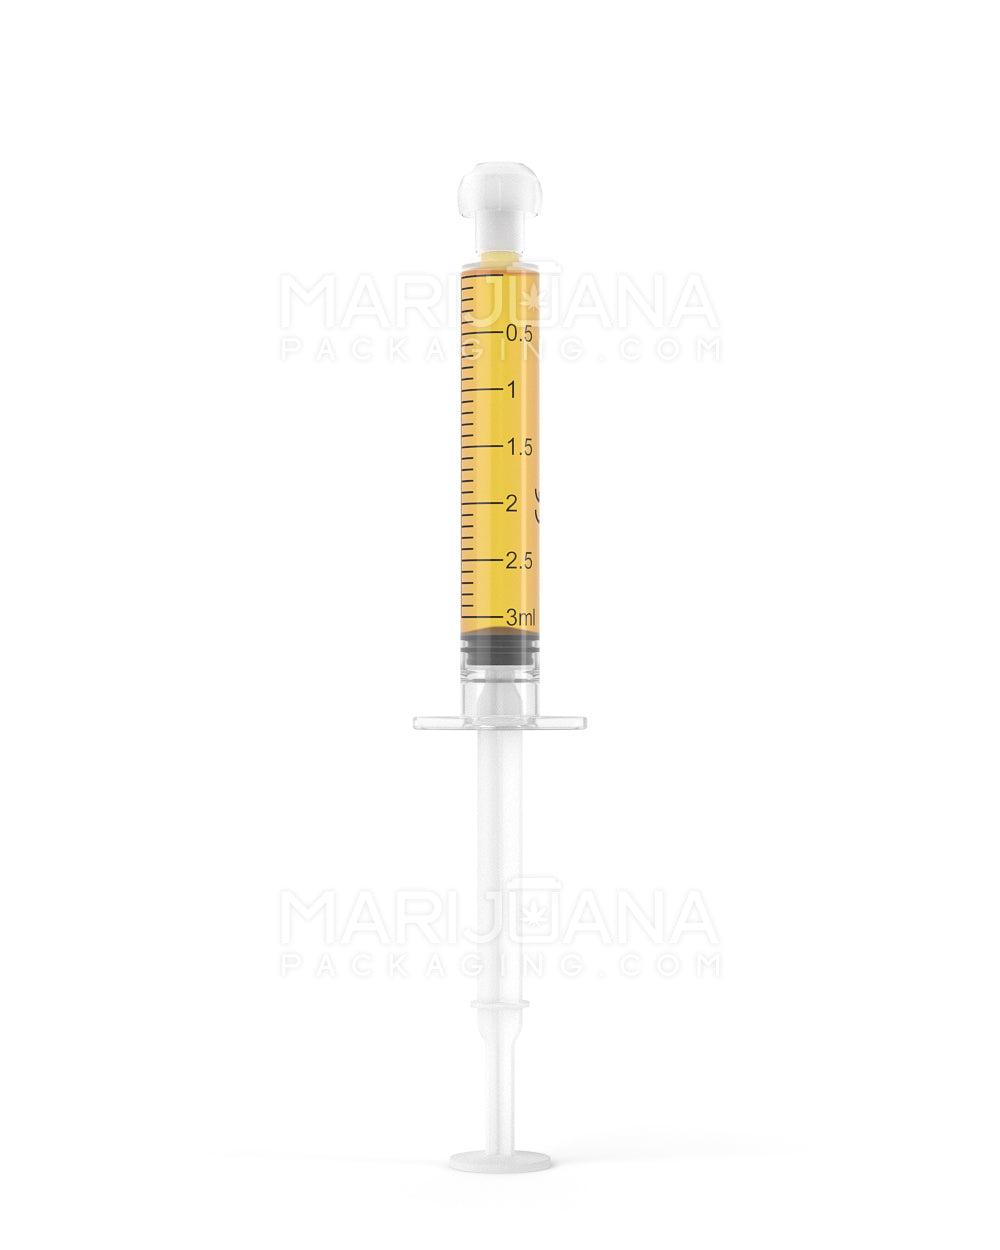 Plastic Oral Concentrate Syringes | 3mL - 0.5mL Increments - 100 Count - 2